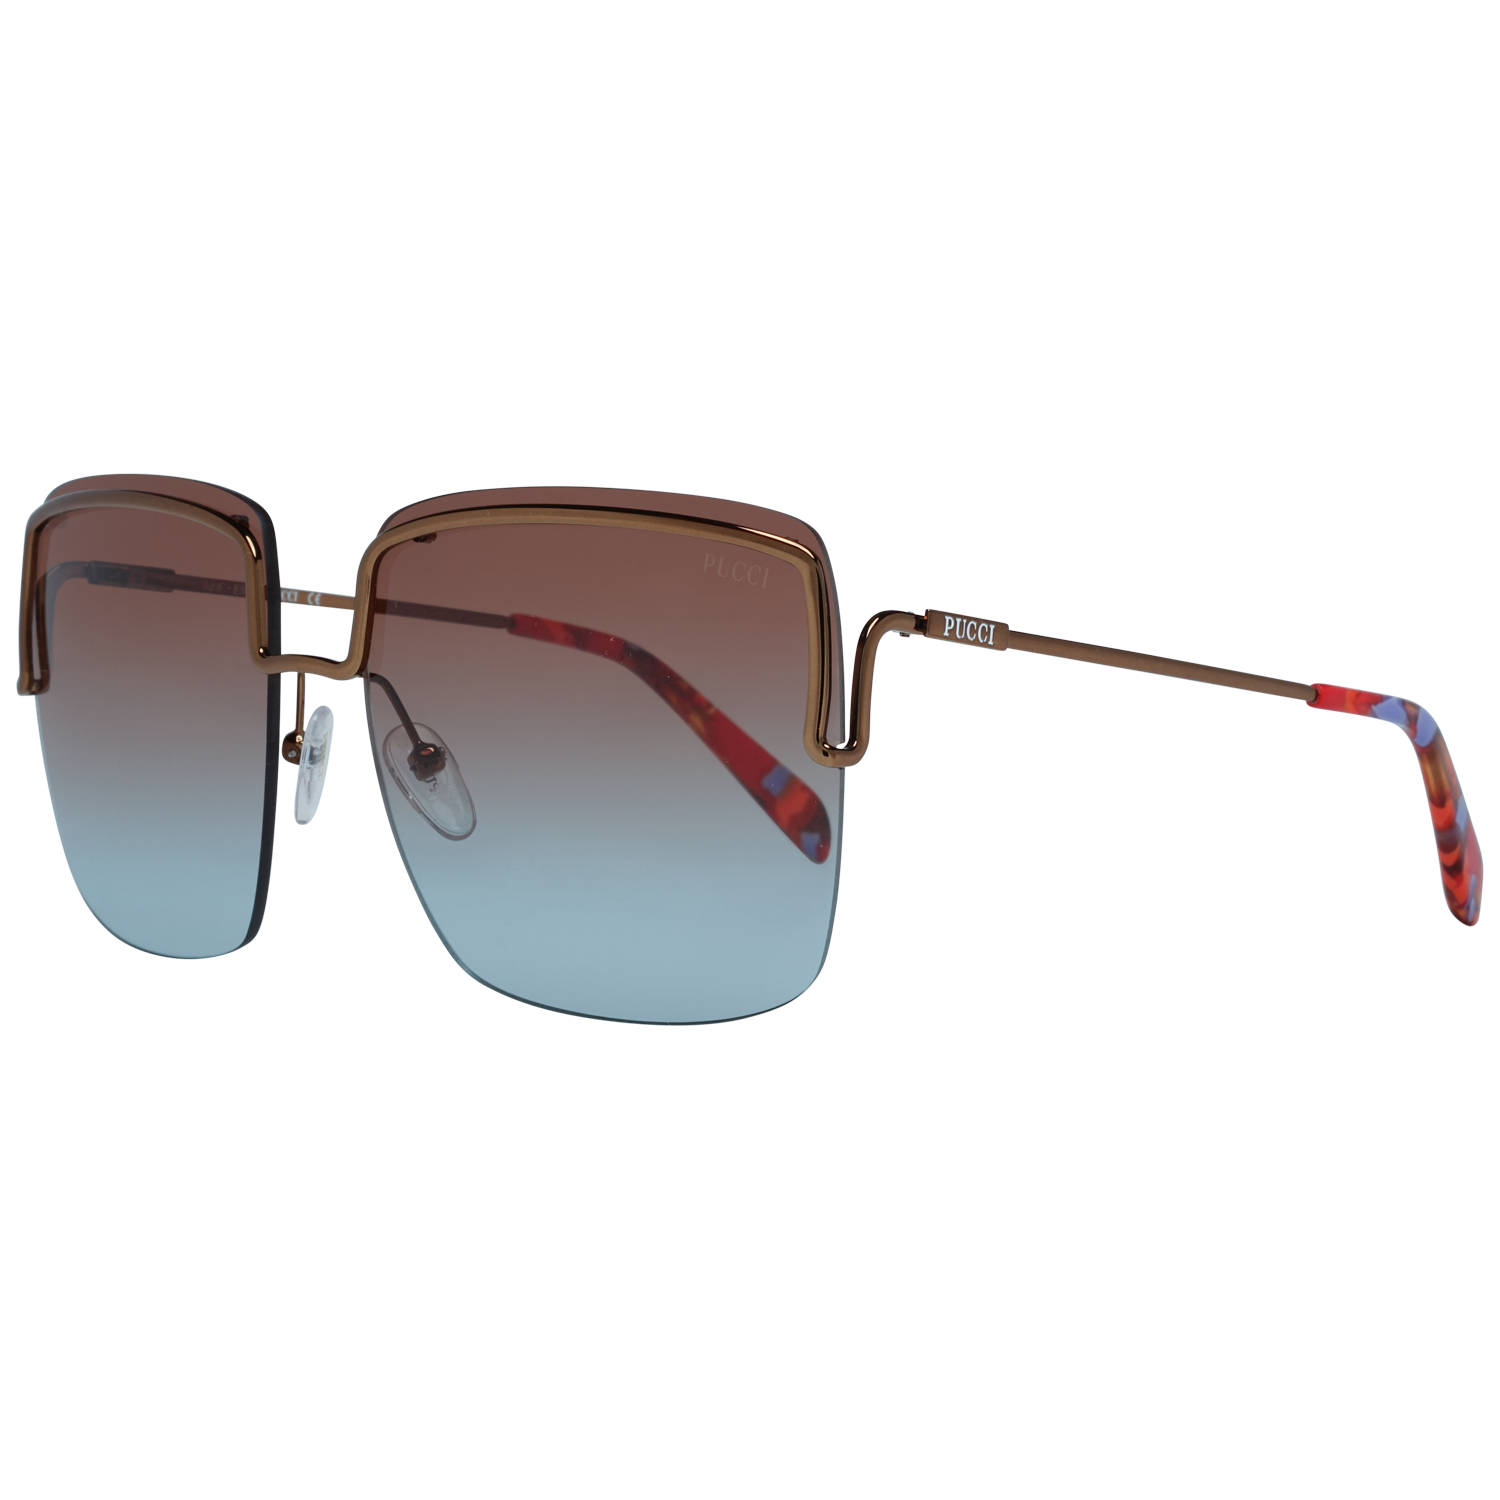 Emilio Pucci Sunglasses EP0116 36F 62 Women
Frame color: Bronze
Lenses color: Multicolor
Lenses material: Plastic
Filter category: 2
Style: Square
Lenses effect: Gradient
Protection: 100% UVA & UVB
Size: 62-16-135
Lenses width: 62
Lenses height: 60
Bridge width: 16
Frame width: 138
Temples length: 135
Shipment includes: Case, cleaning cloth
Spring hinge: No